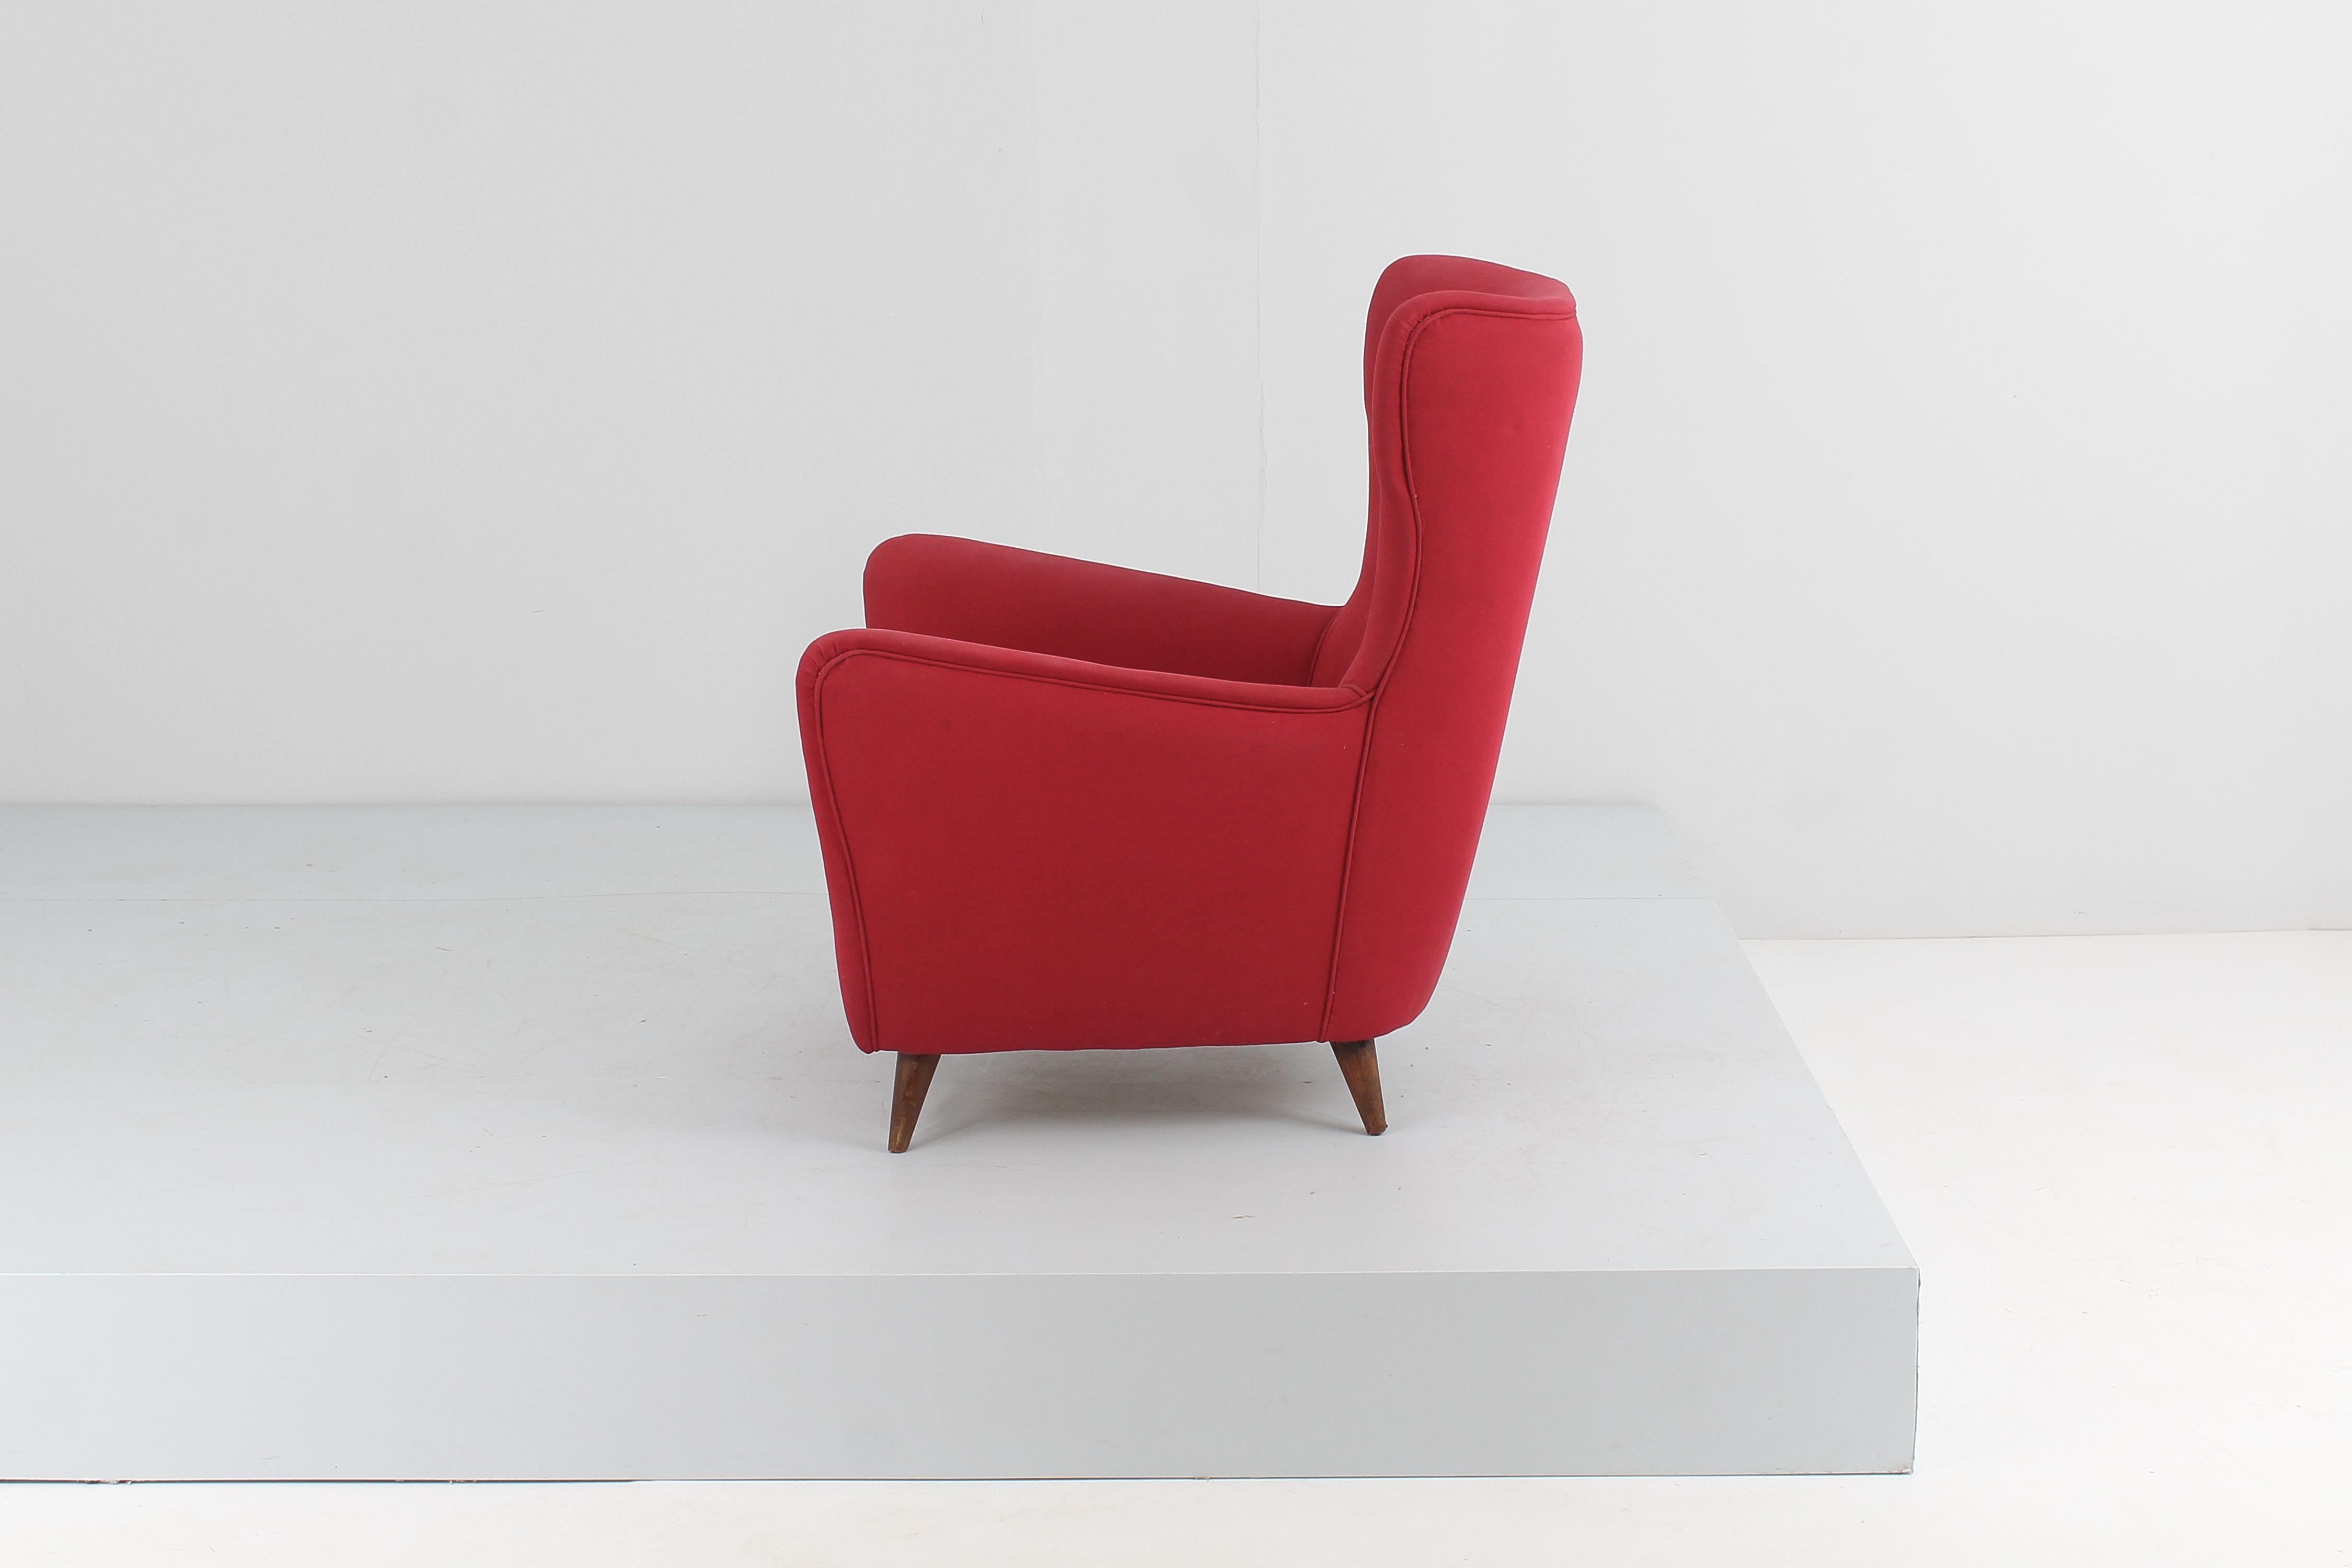 Midcentury Giò Ponti Style Wood and Red Fabric Armchair, circa 1950s Italy  For Sale 1